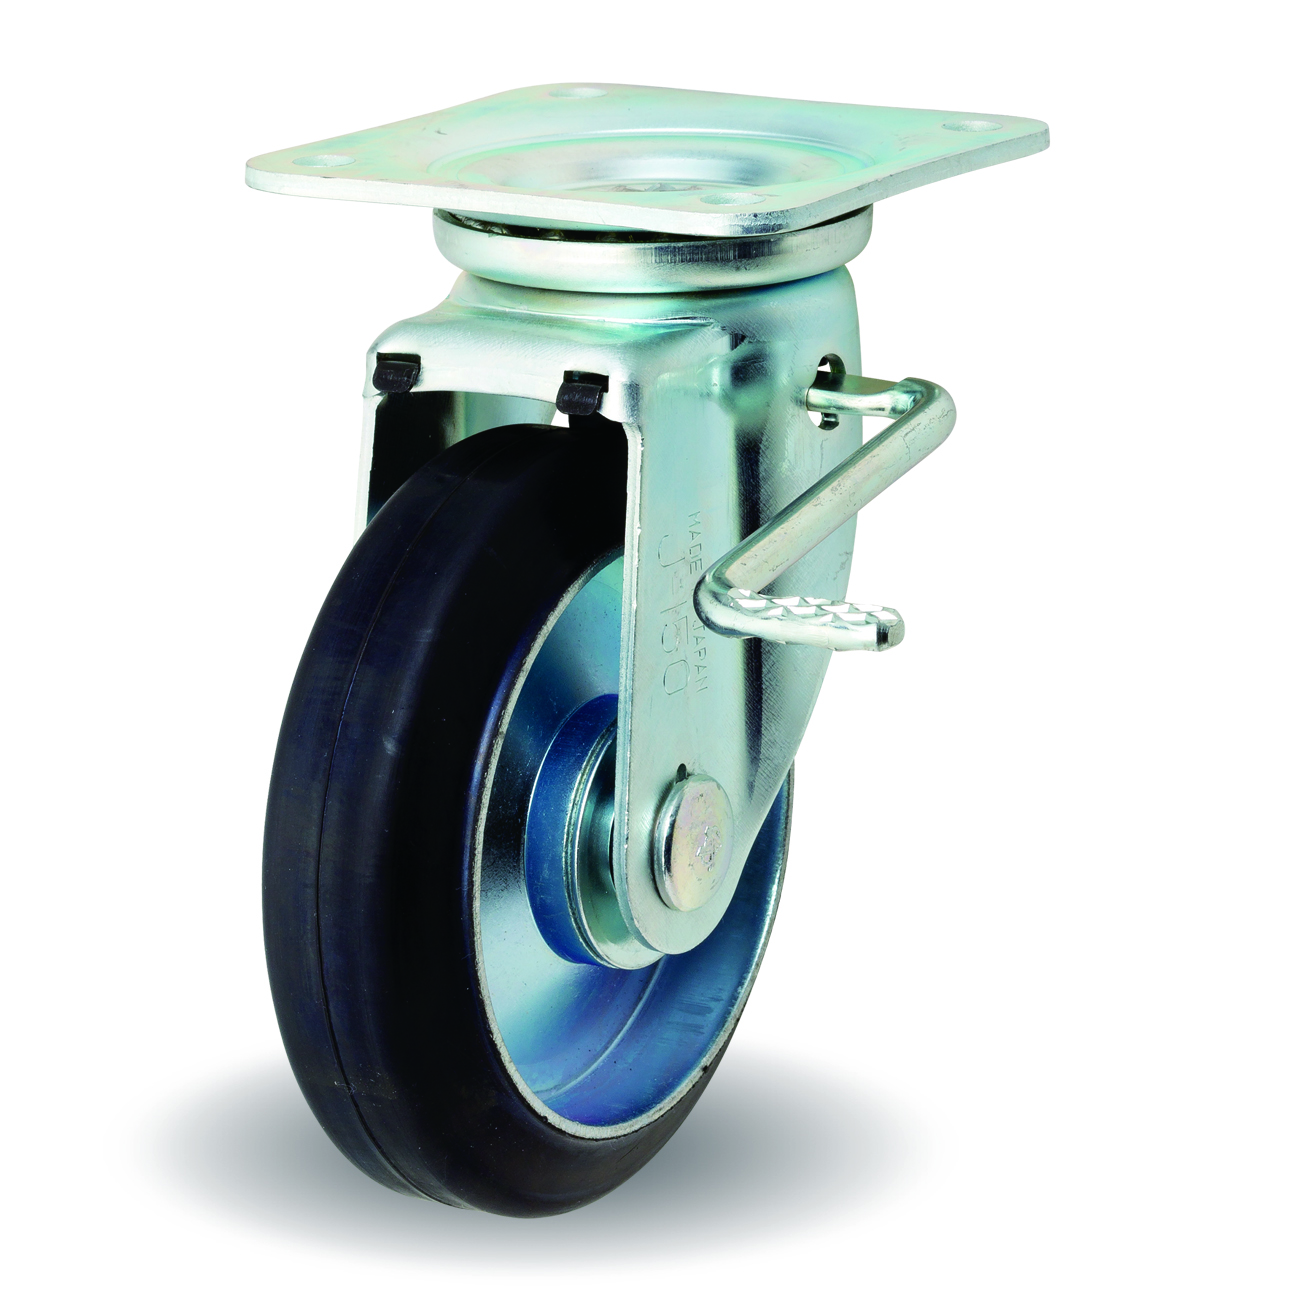 Casters - Rubber with steel swivel plate, integrated brake and bracket, JB, F/JB series.